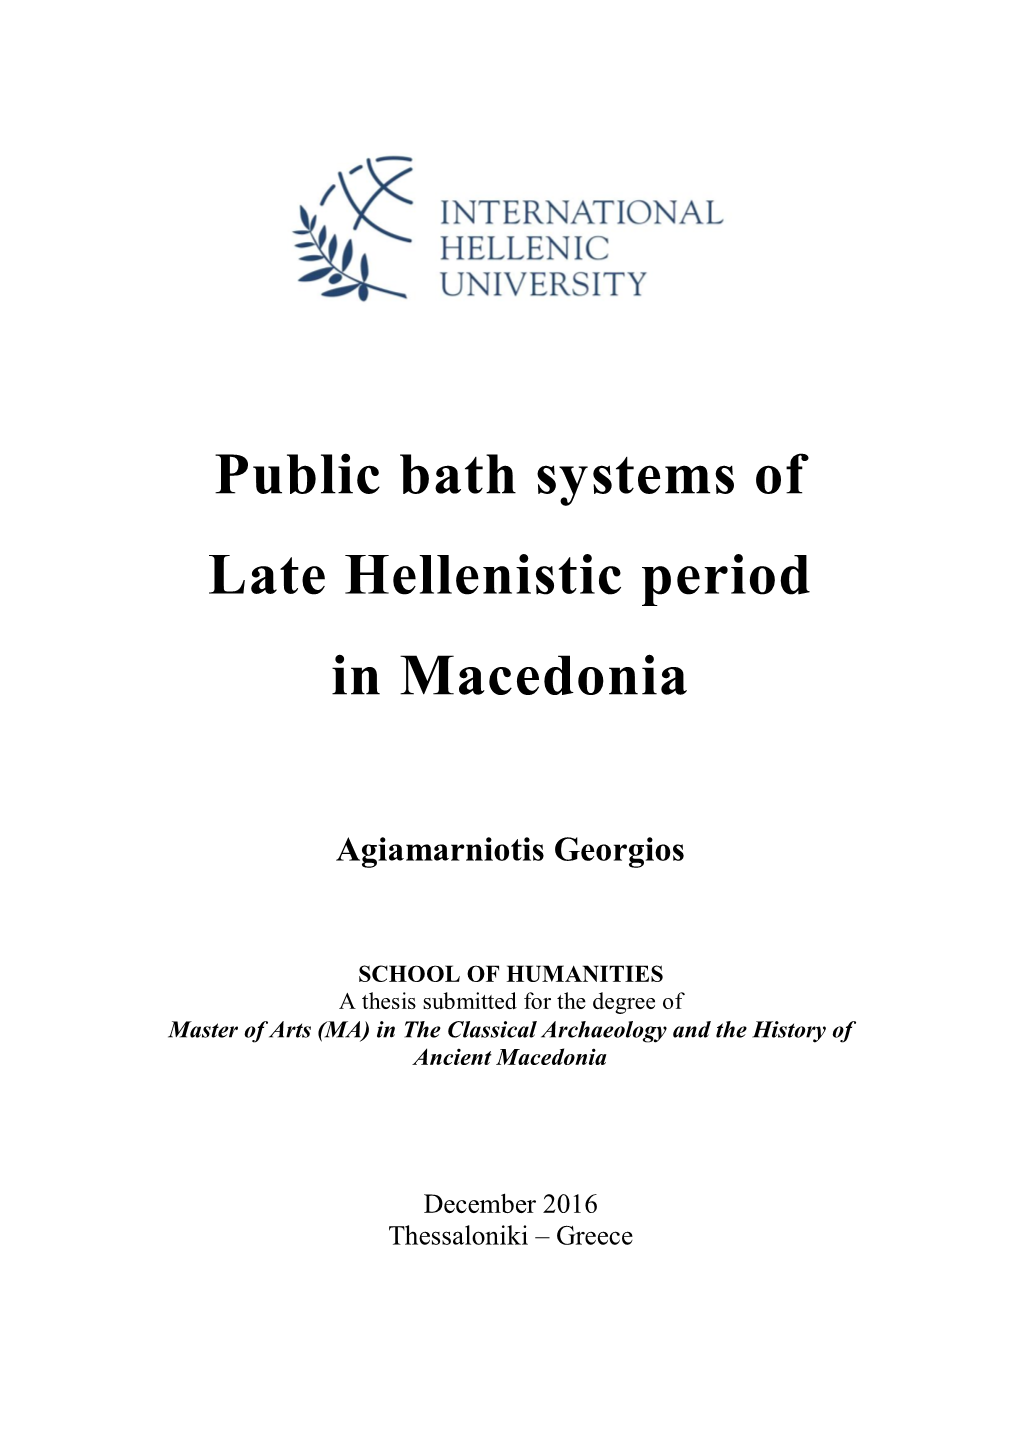 Public Bath Systems of Late Hellenistic Period in Macedonia